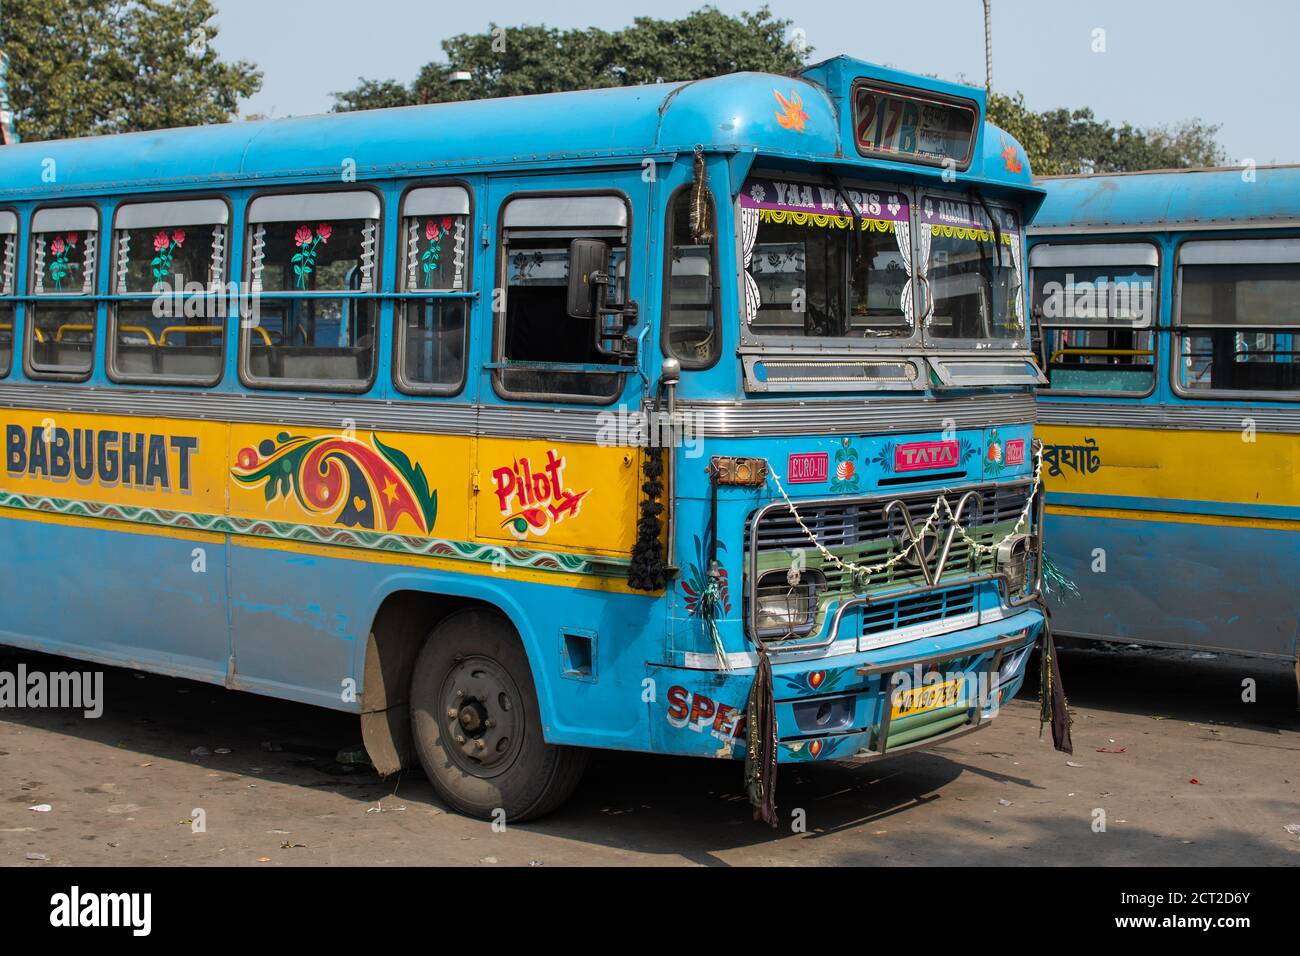 Kolkata, India - February 1, 2020: Two traditional turquoise and yellow public buses parked at a bus station on February 1, 2020 in Kolkata, India Stock Photo